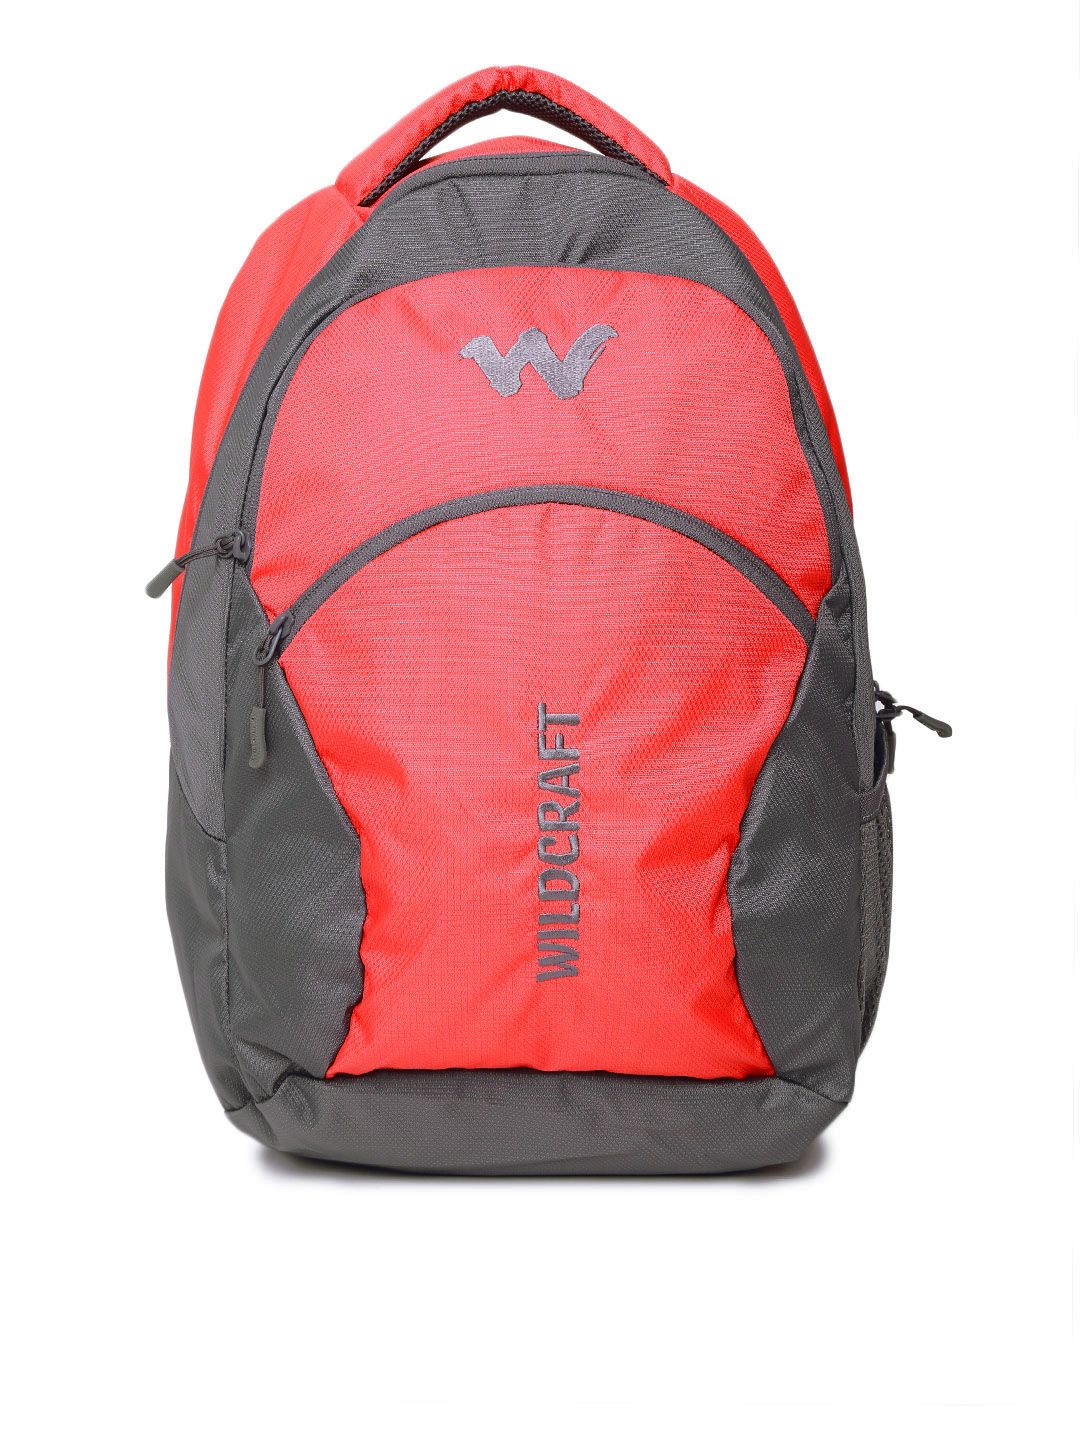 Wildcraft Unisex Pink & Grey Colourblocked Backpack Price in India